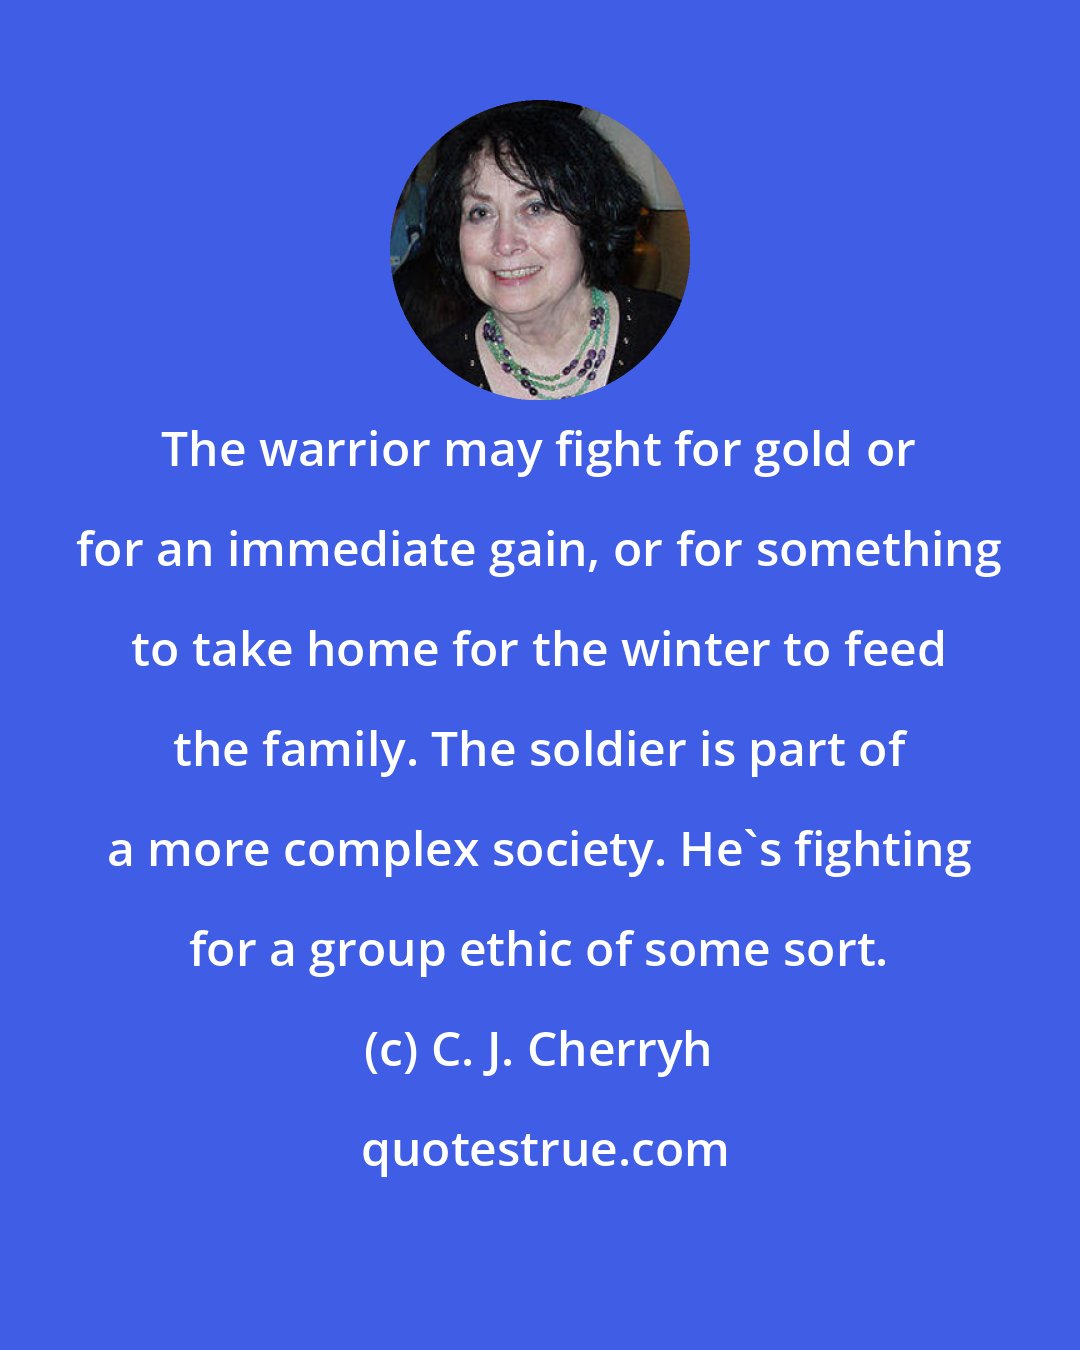 C. J. Cherryh: The warrior may fight for gold or for an immediate gain, or for something to take home for the winter to feed the family. The soldier is part of a more complex society. He's fighting for a group ethic of some sort.